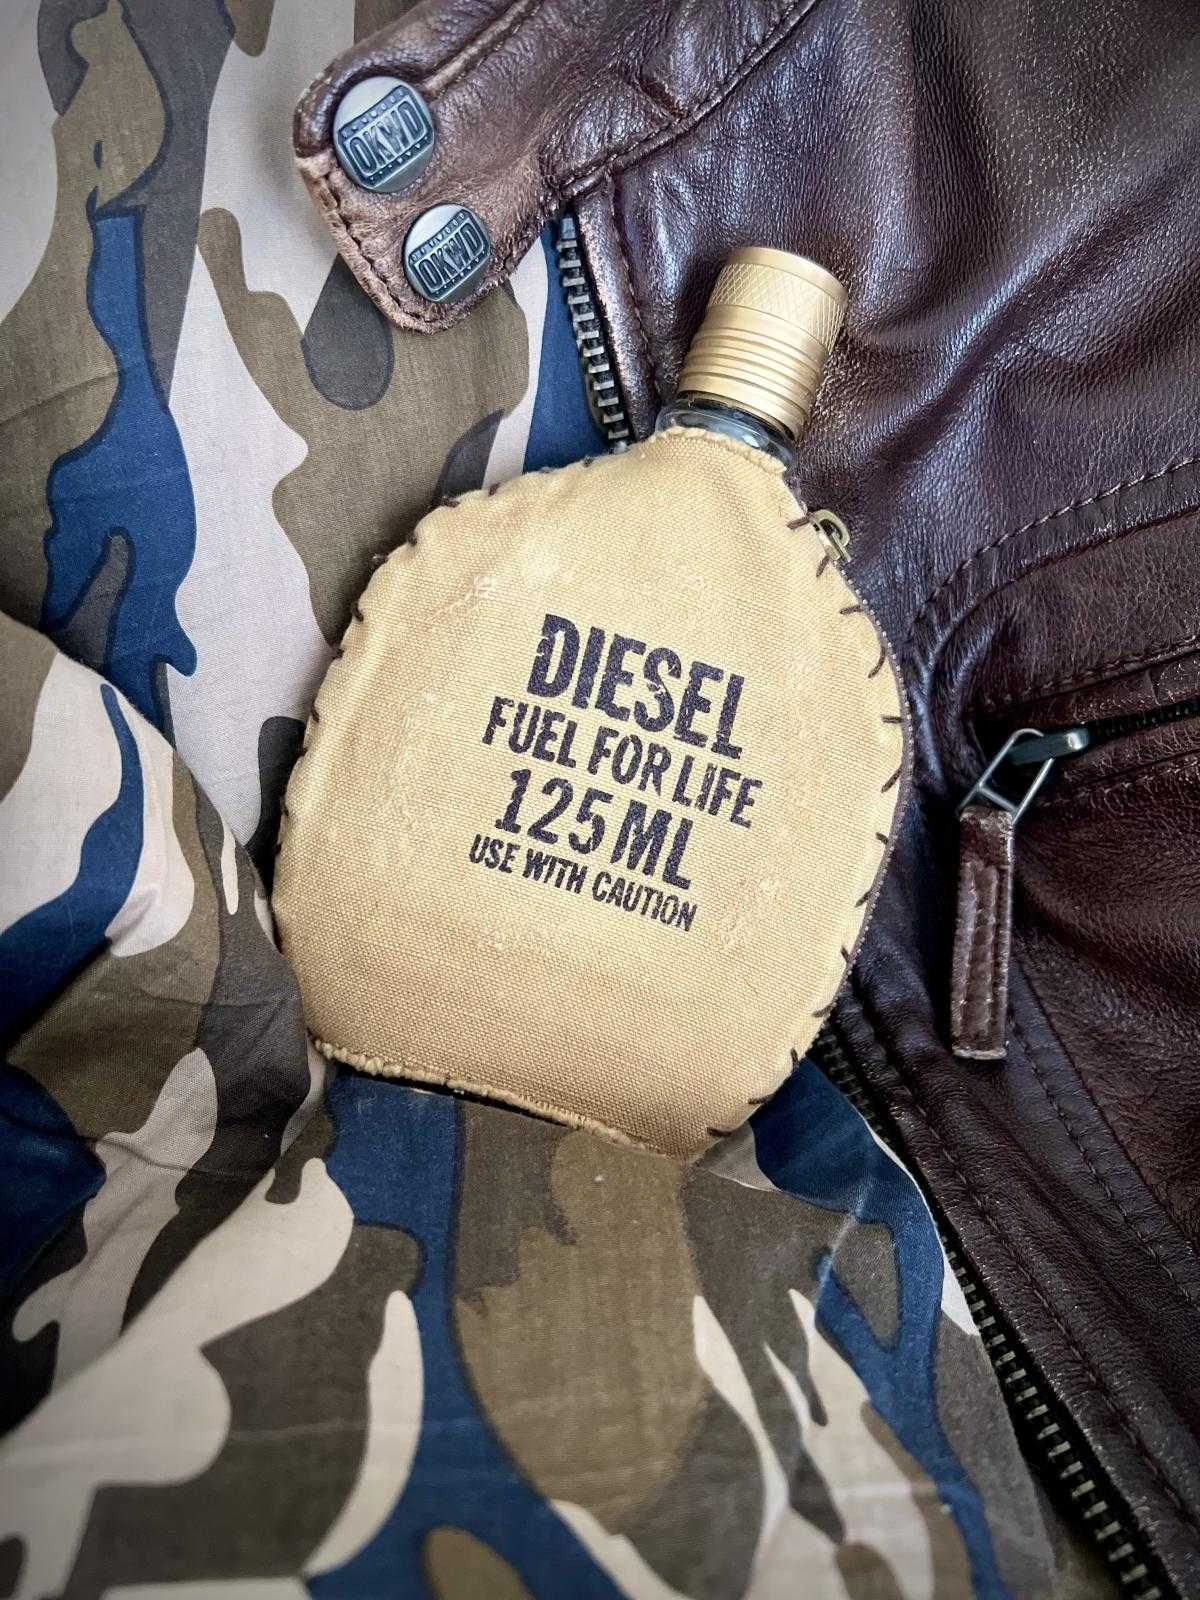 Diesel Fuel for Life Homme, 125 ml